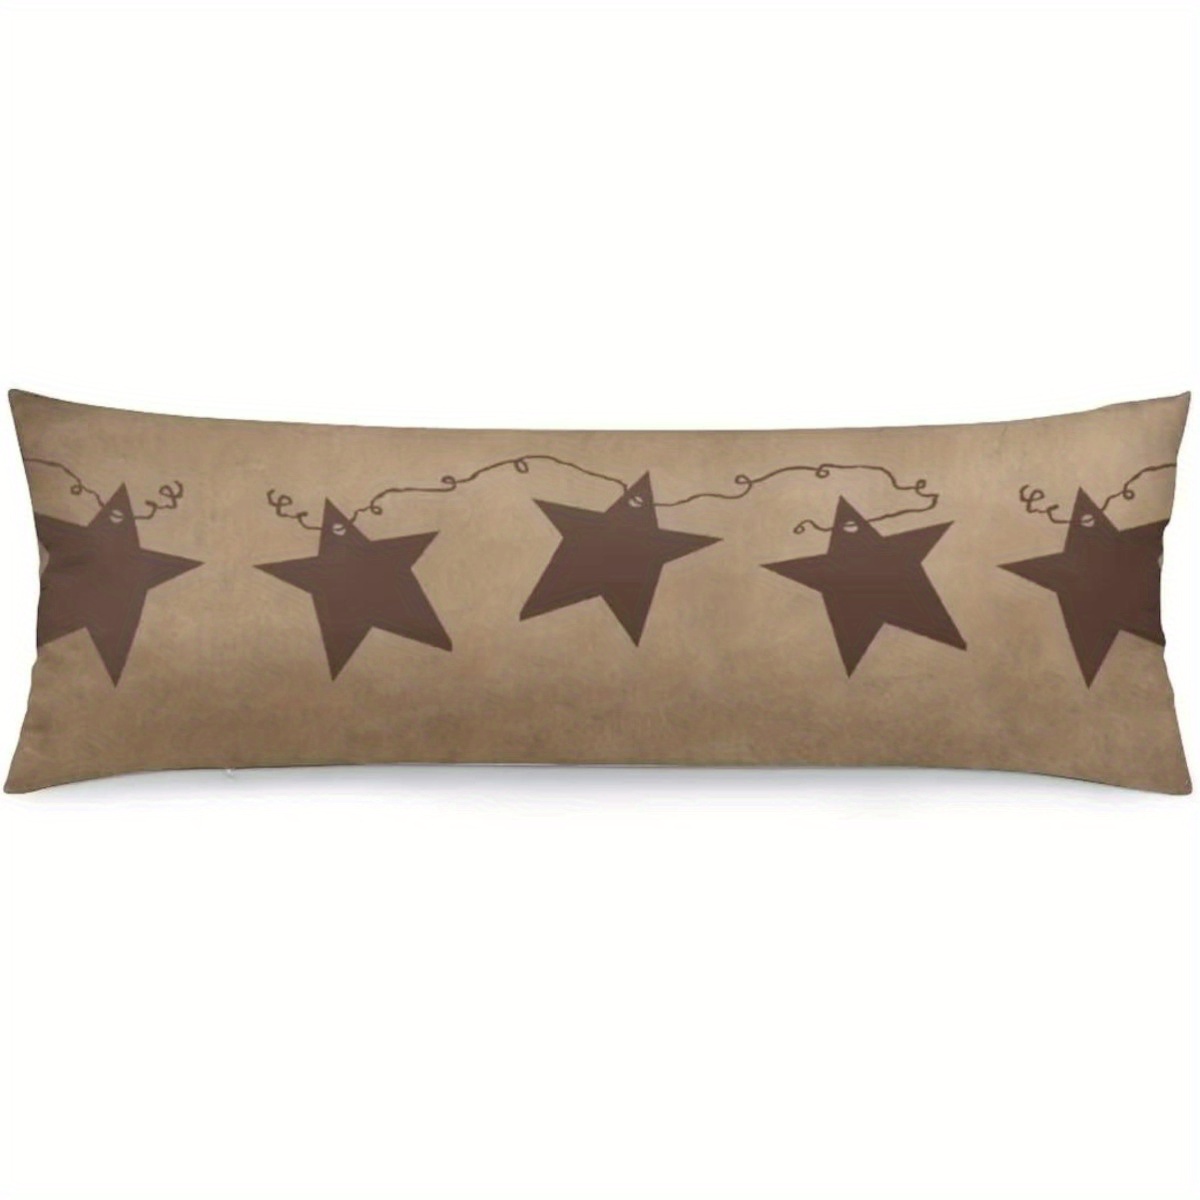 

1pc, Rustic Farmhouse Body Pillow Cover, 20"x54", Vintage Primitive Country Style With Rusty Texas Star Design, Decorative Long Pillow Case Protector With Zipper, Large Pillowcases For Home Decor